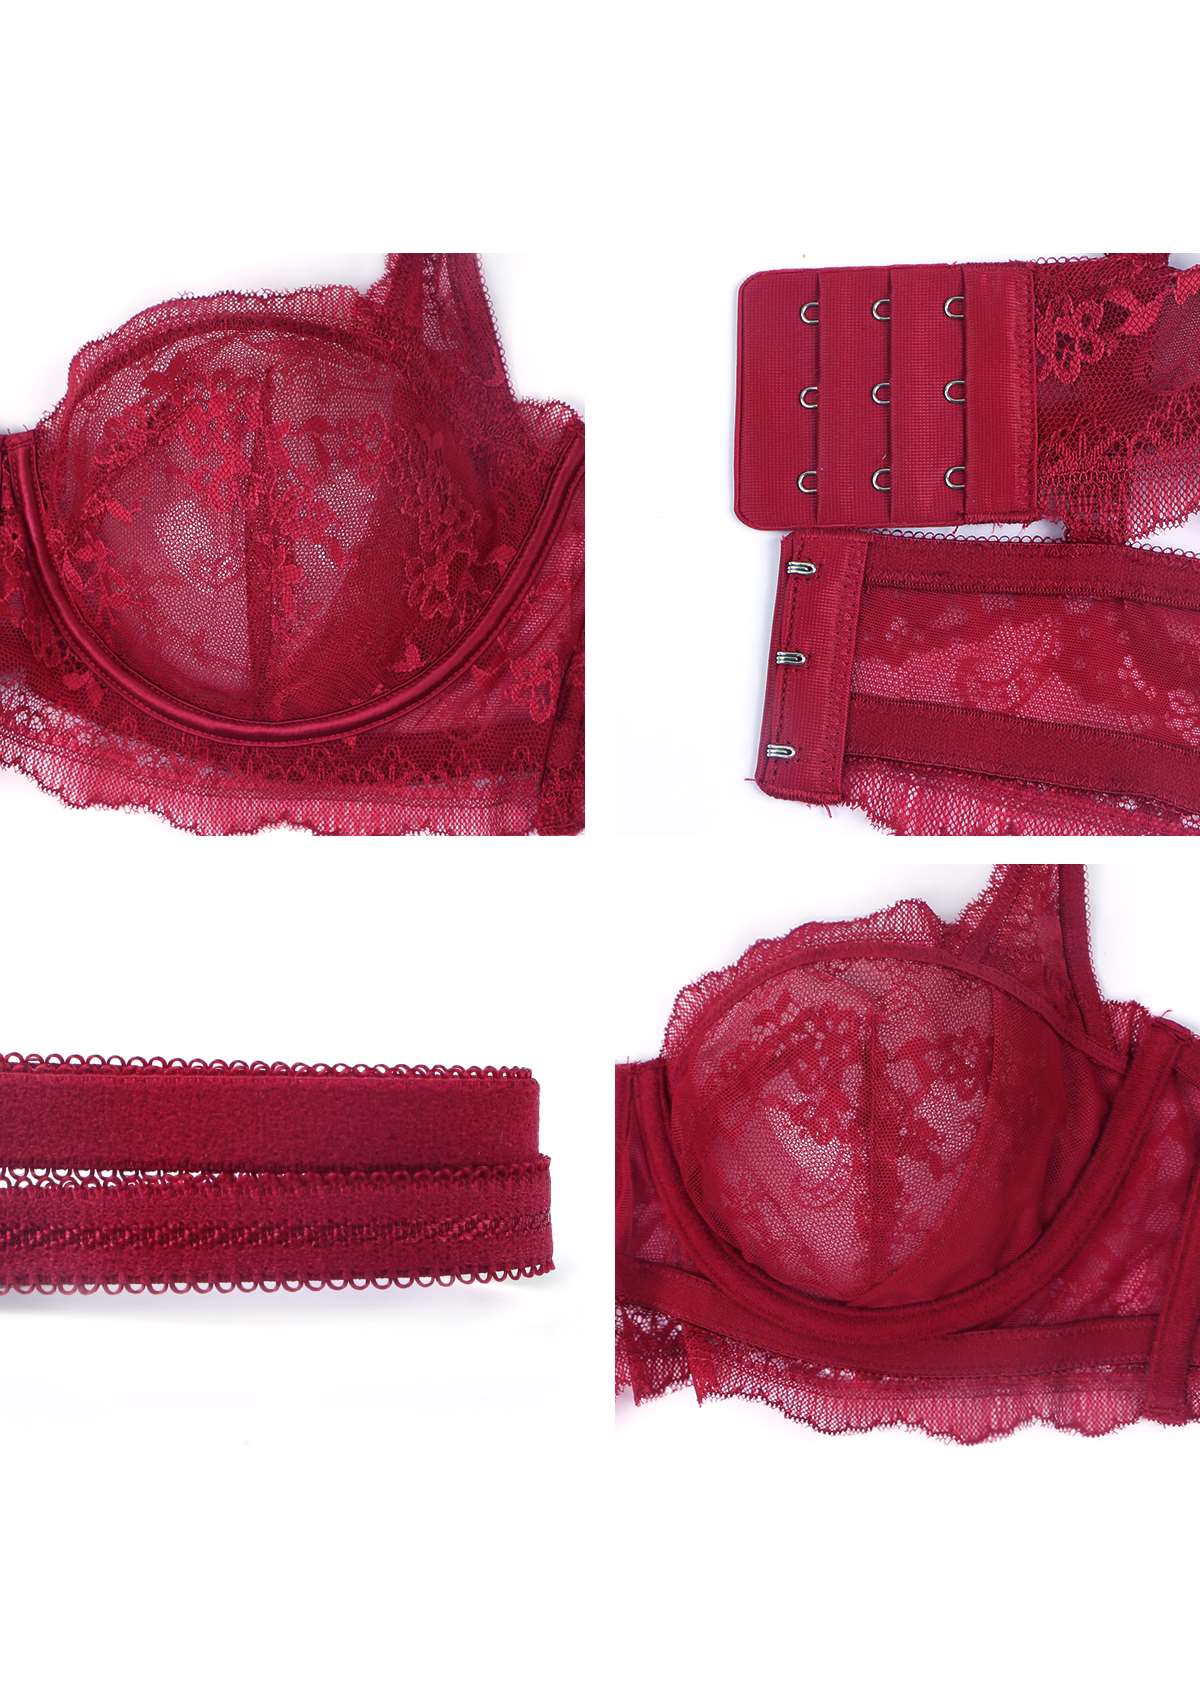 HSIA Floral Lace Unlined Bridal Balconette Bra Set - Supportive Classic - Burgundy / 42 / DD/E